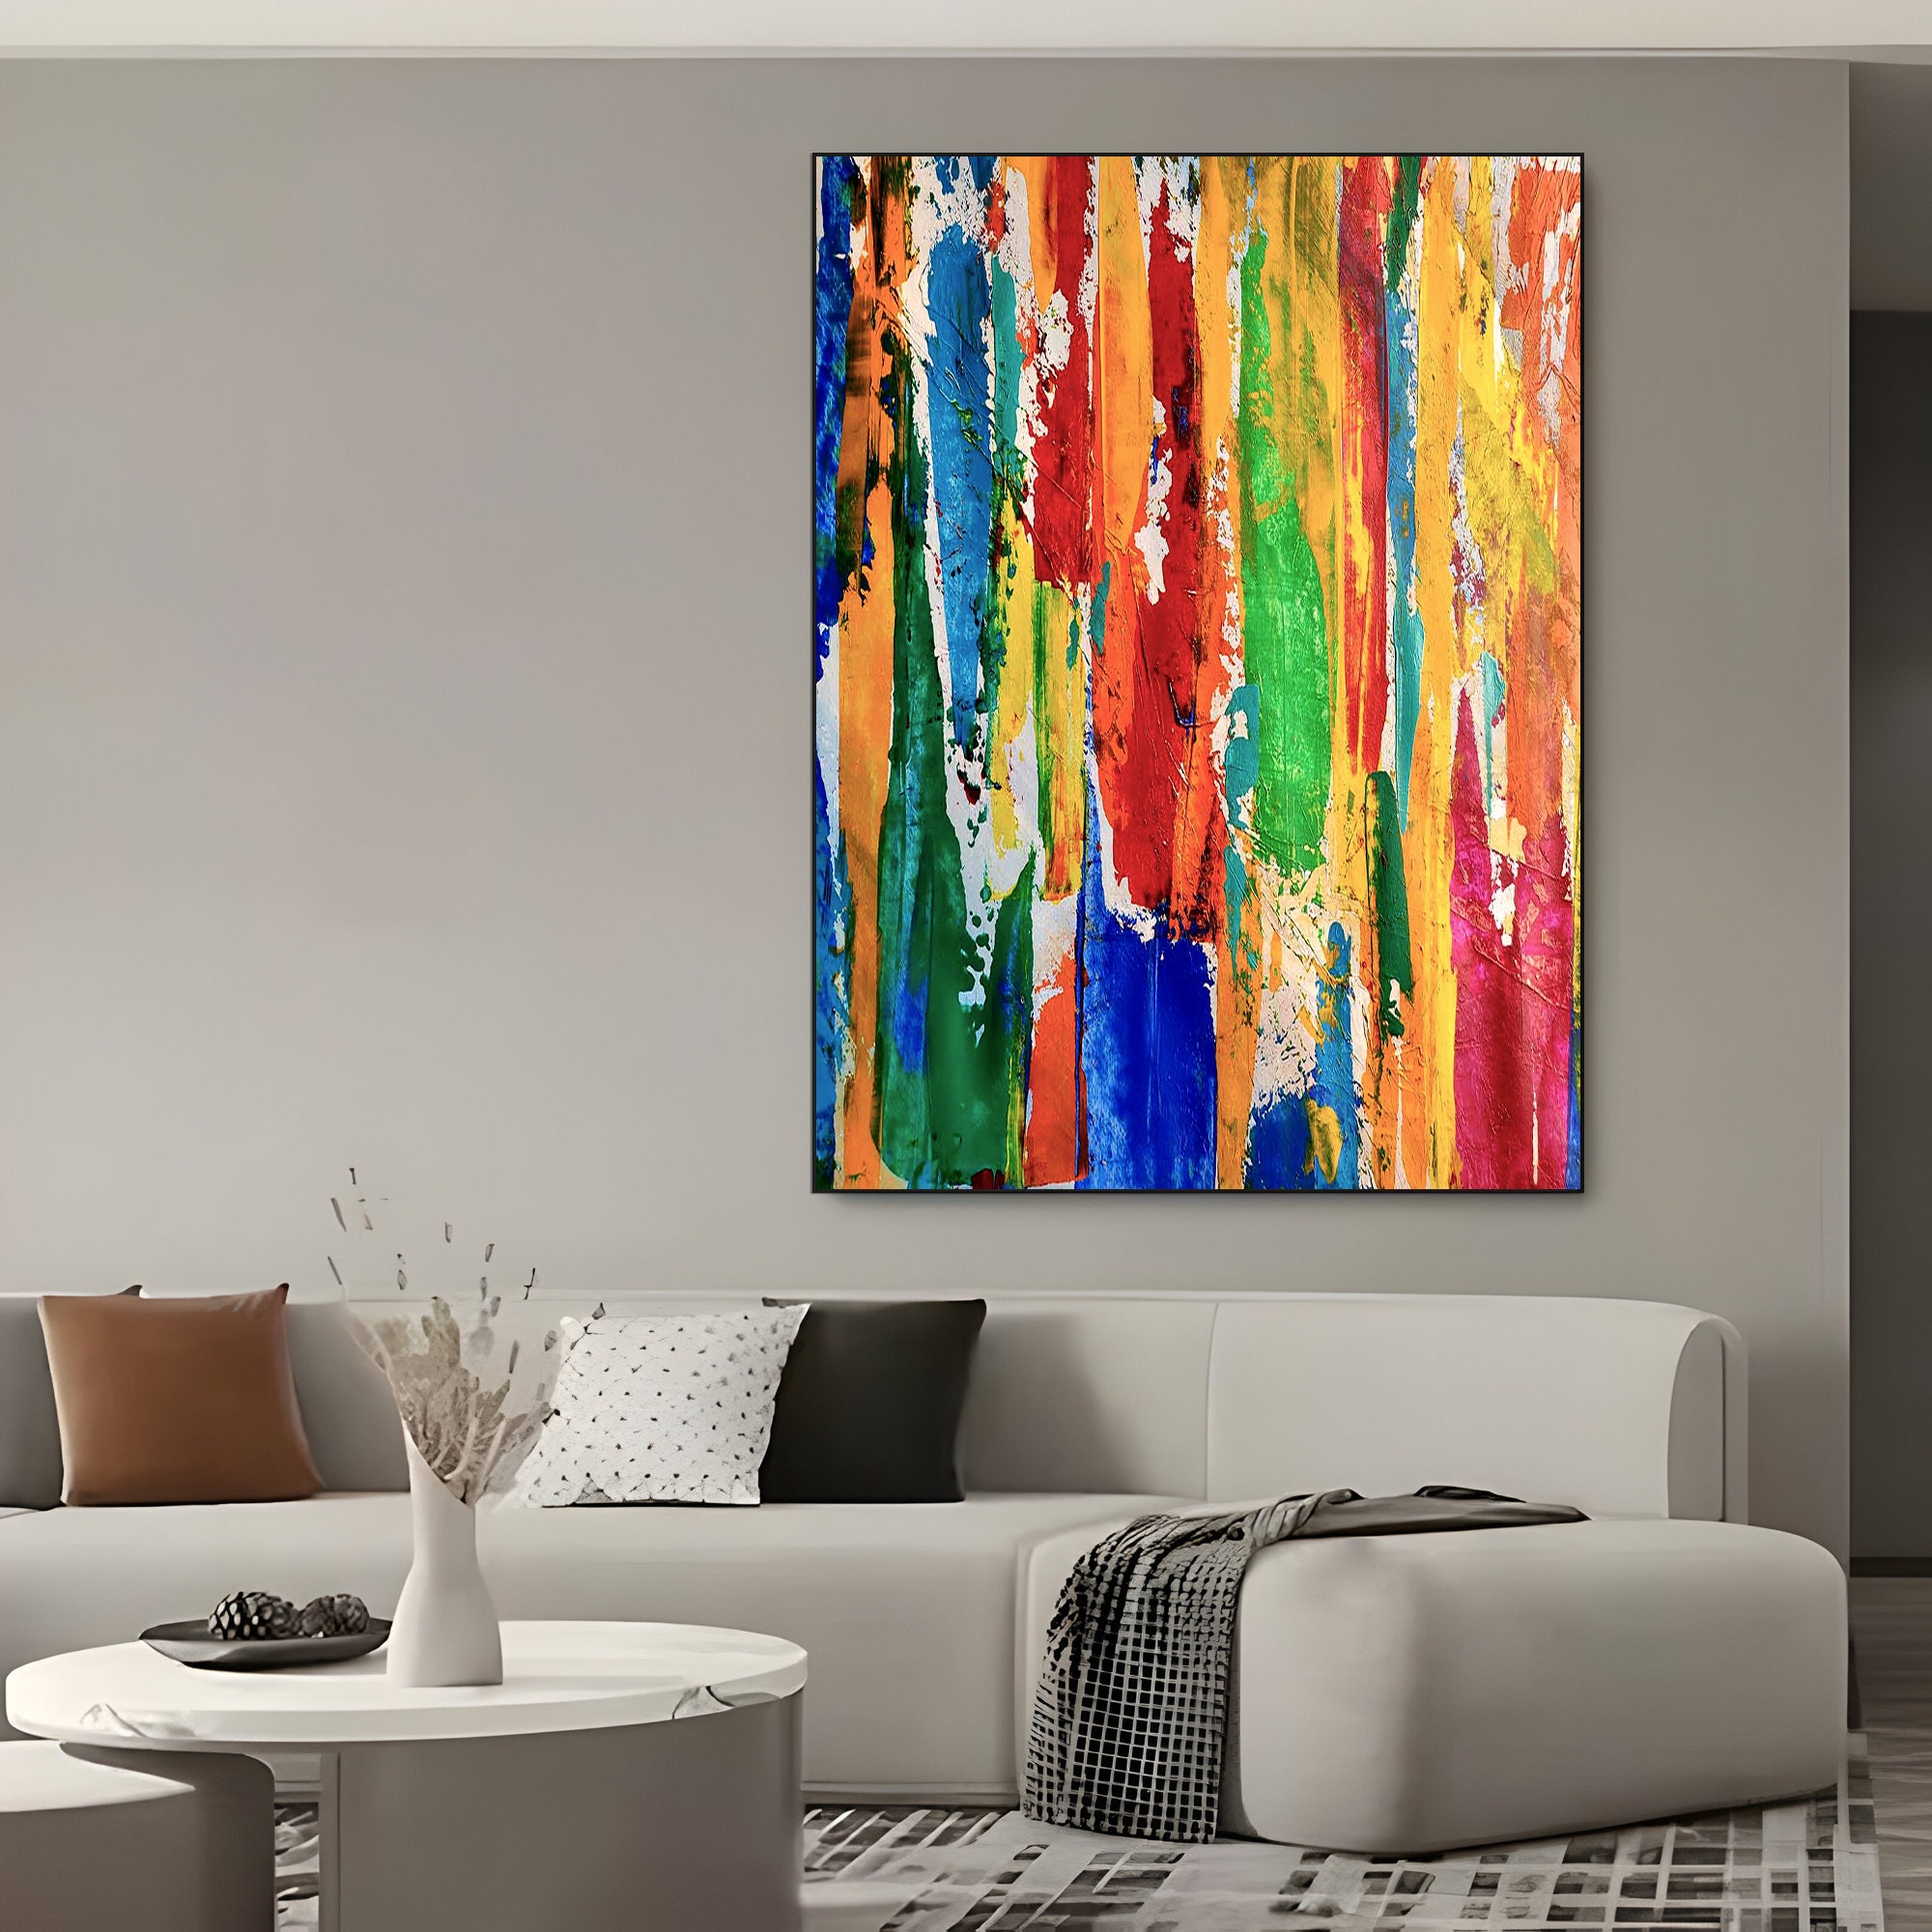  100% Hand-Painted Original Oil Painting Contemporary Art Large  Canvas Art Abstract Modern Living Room Wall Art Decor Modern Acrylic  Abstract Art Brother Gifts 96X48 Unframed: Paintings